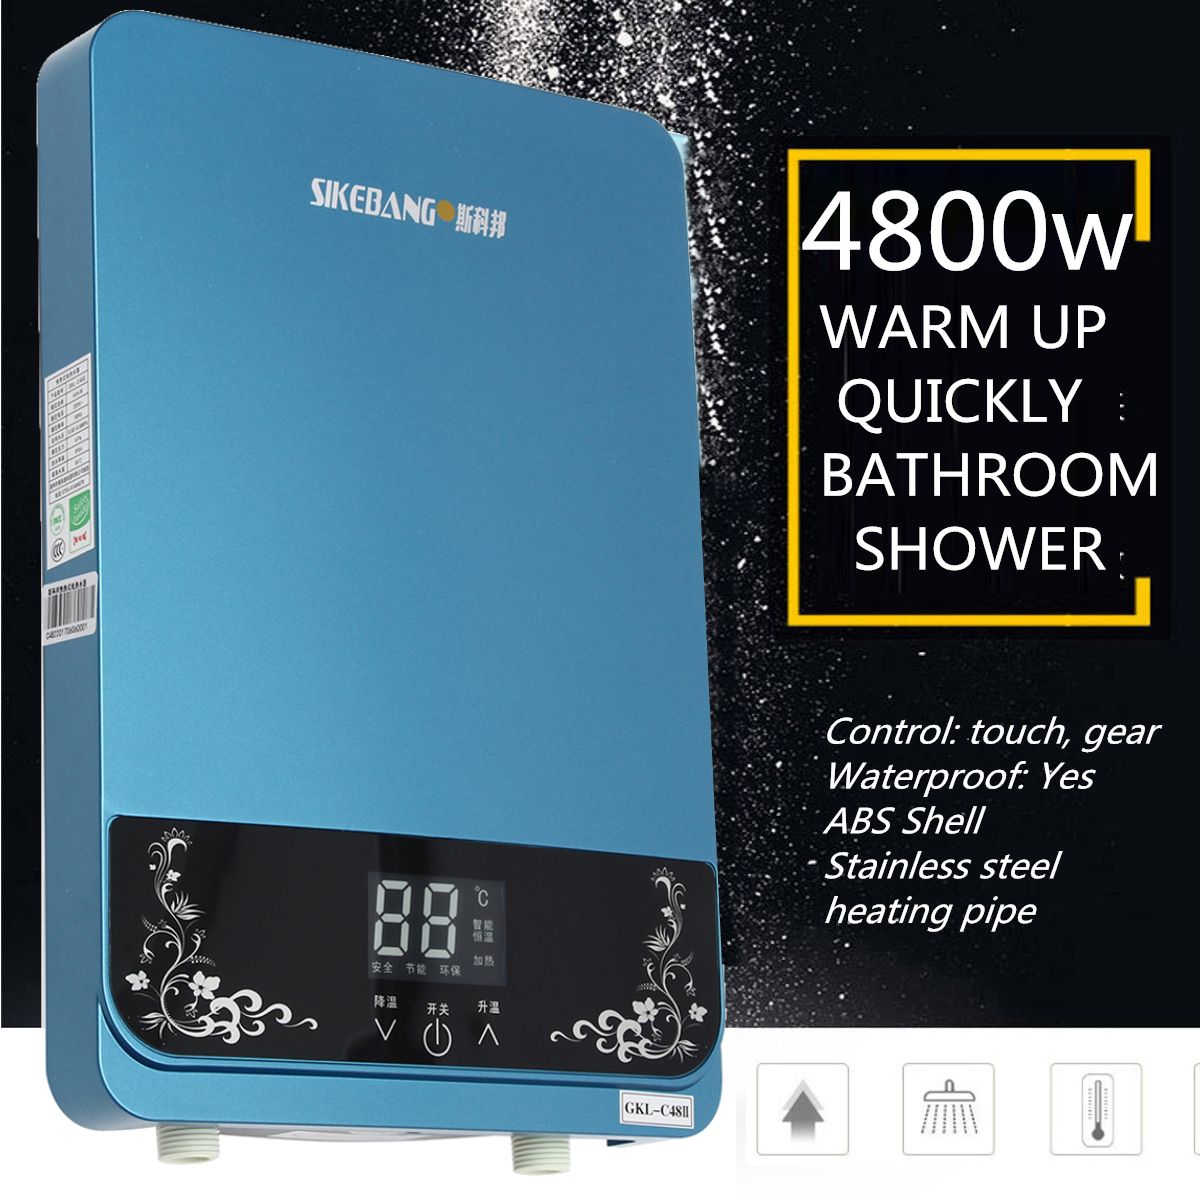 6500W-240V-Instant-Electric-Water-Heater-Heating-Tools-Tankless-Shower-Hot-Water-System-Set-1279972